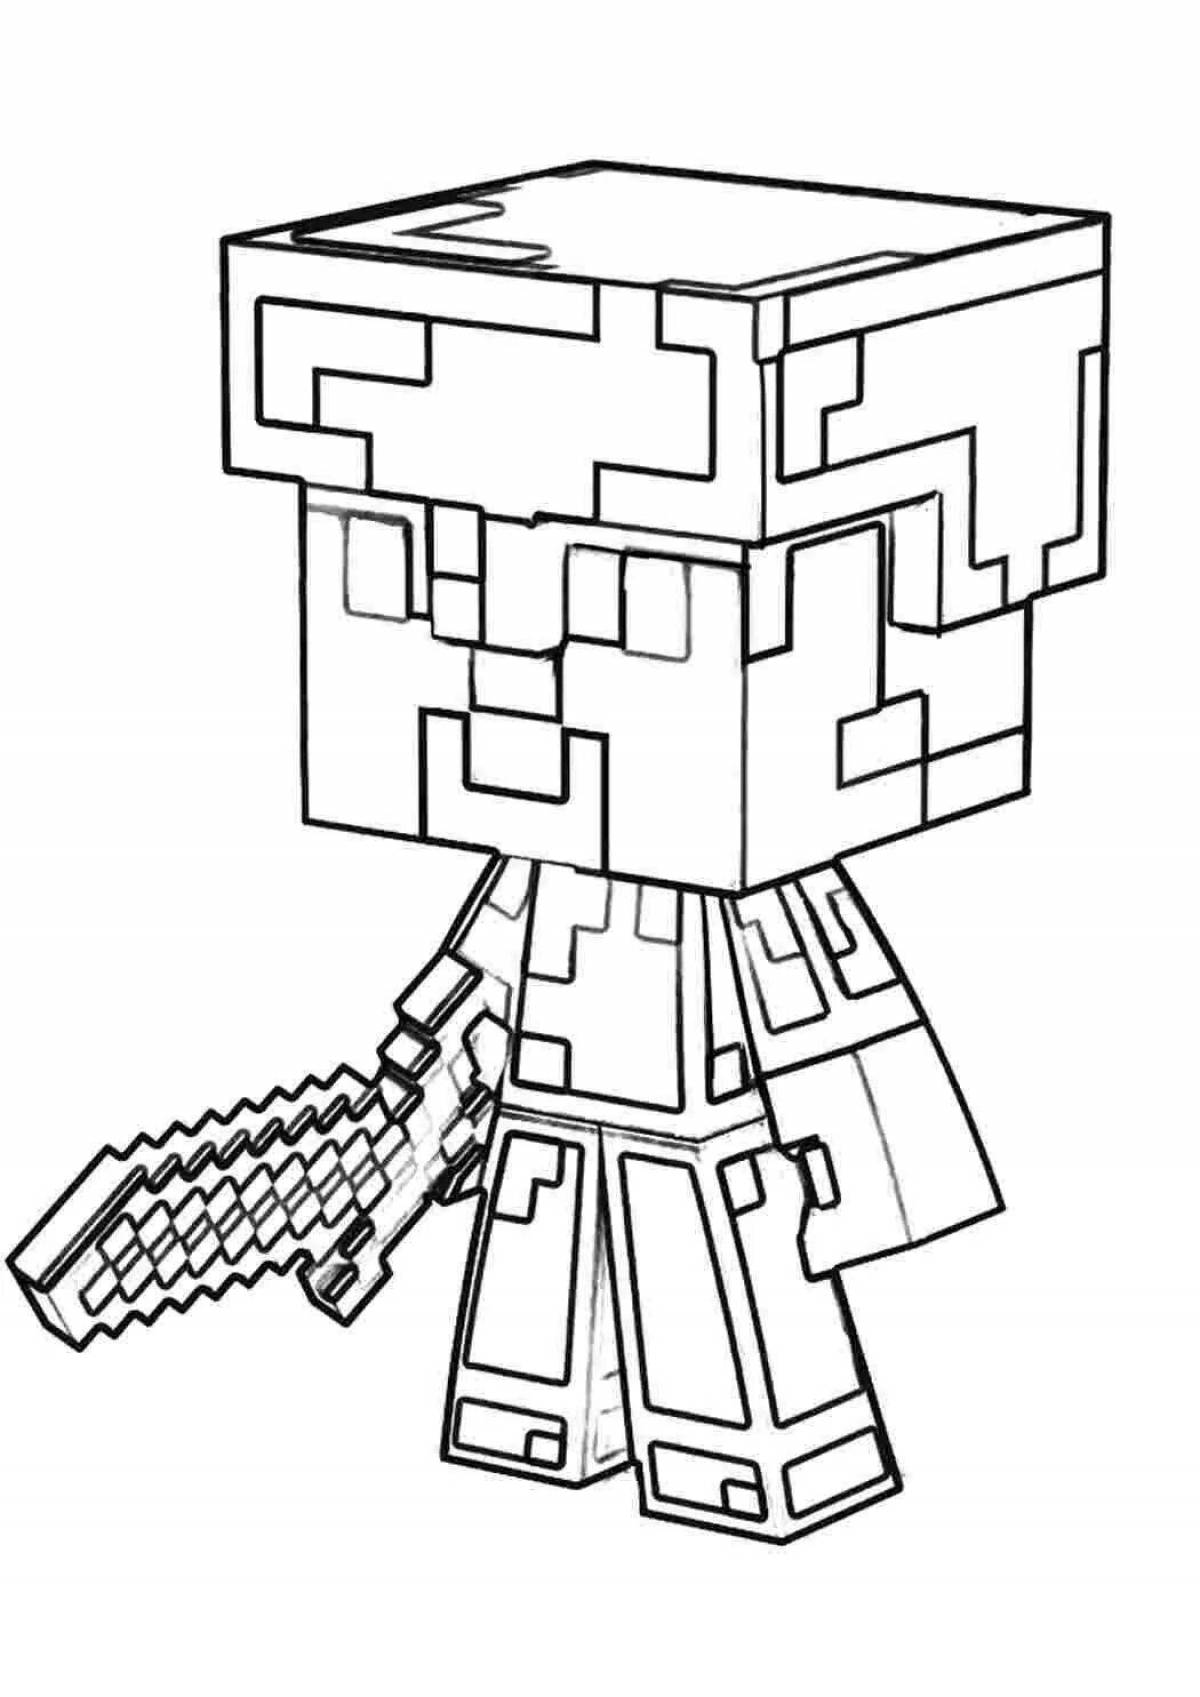 Fancy minecraft pig coloring pages